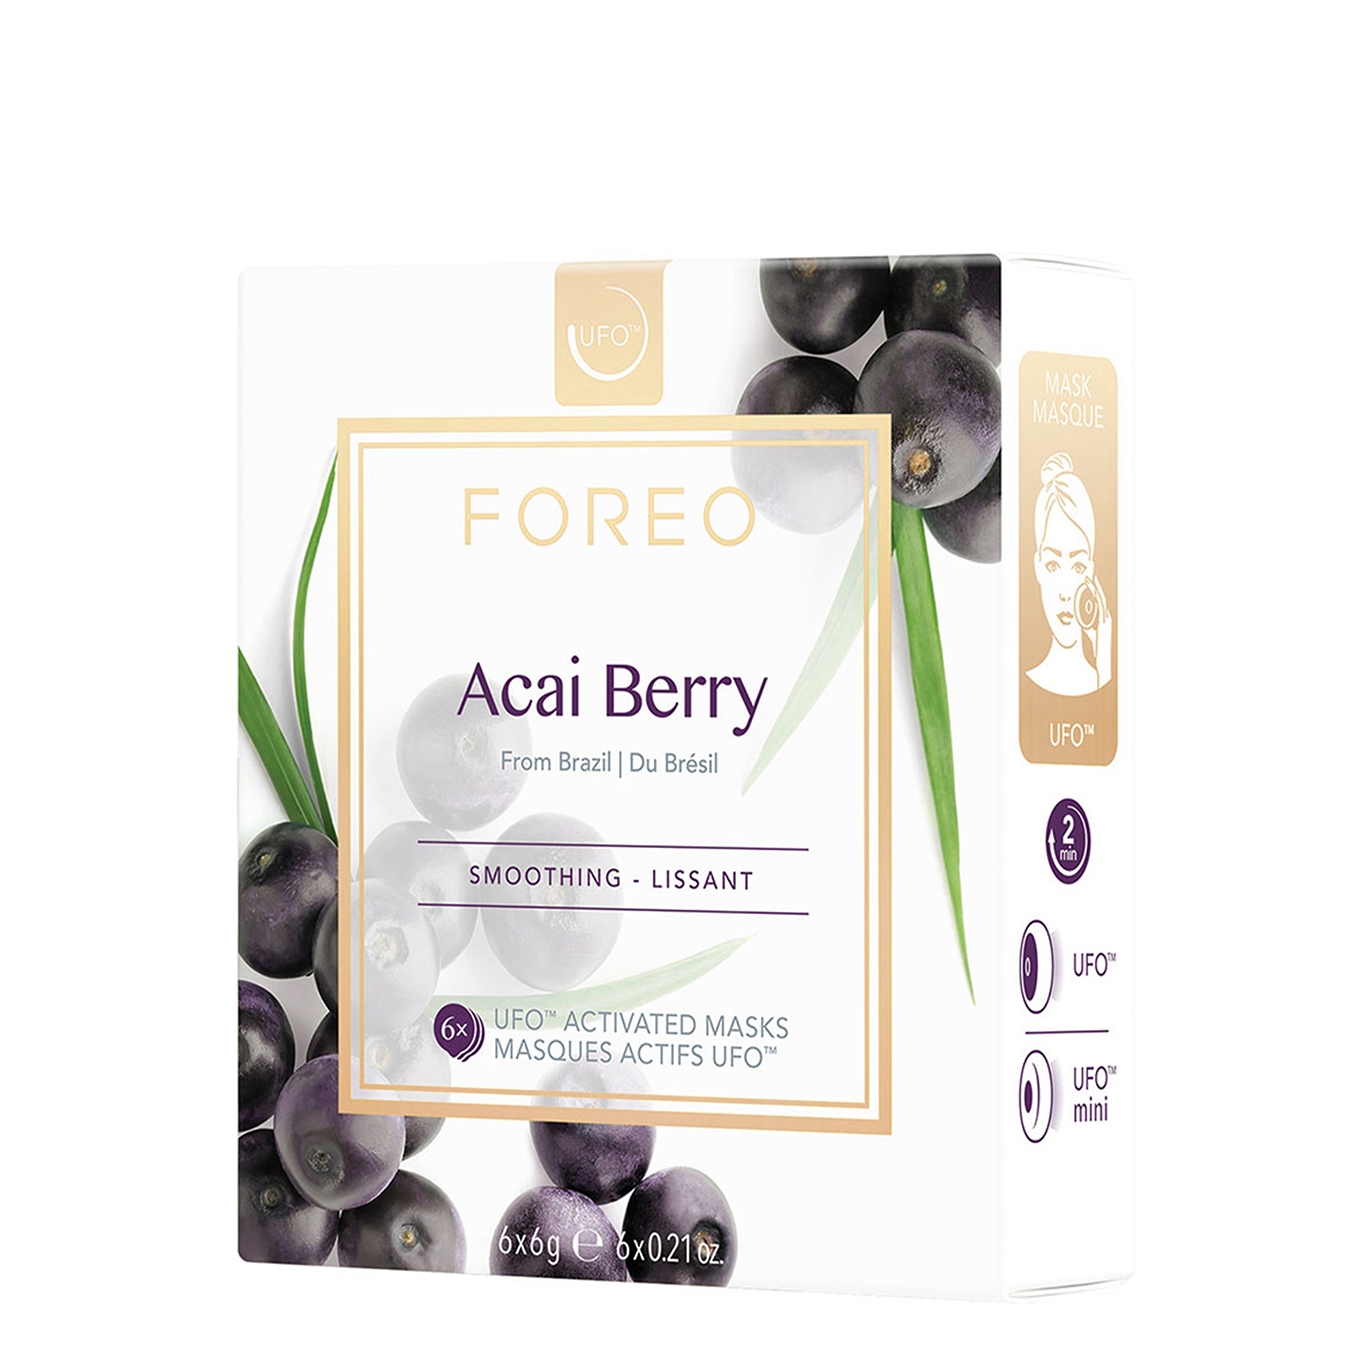 Acai Berry Ufo/ufo Mini Firming Face Mask for Ageing Skin